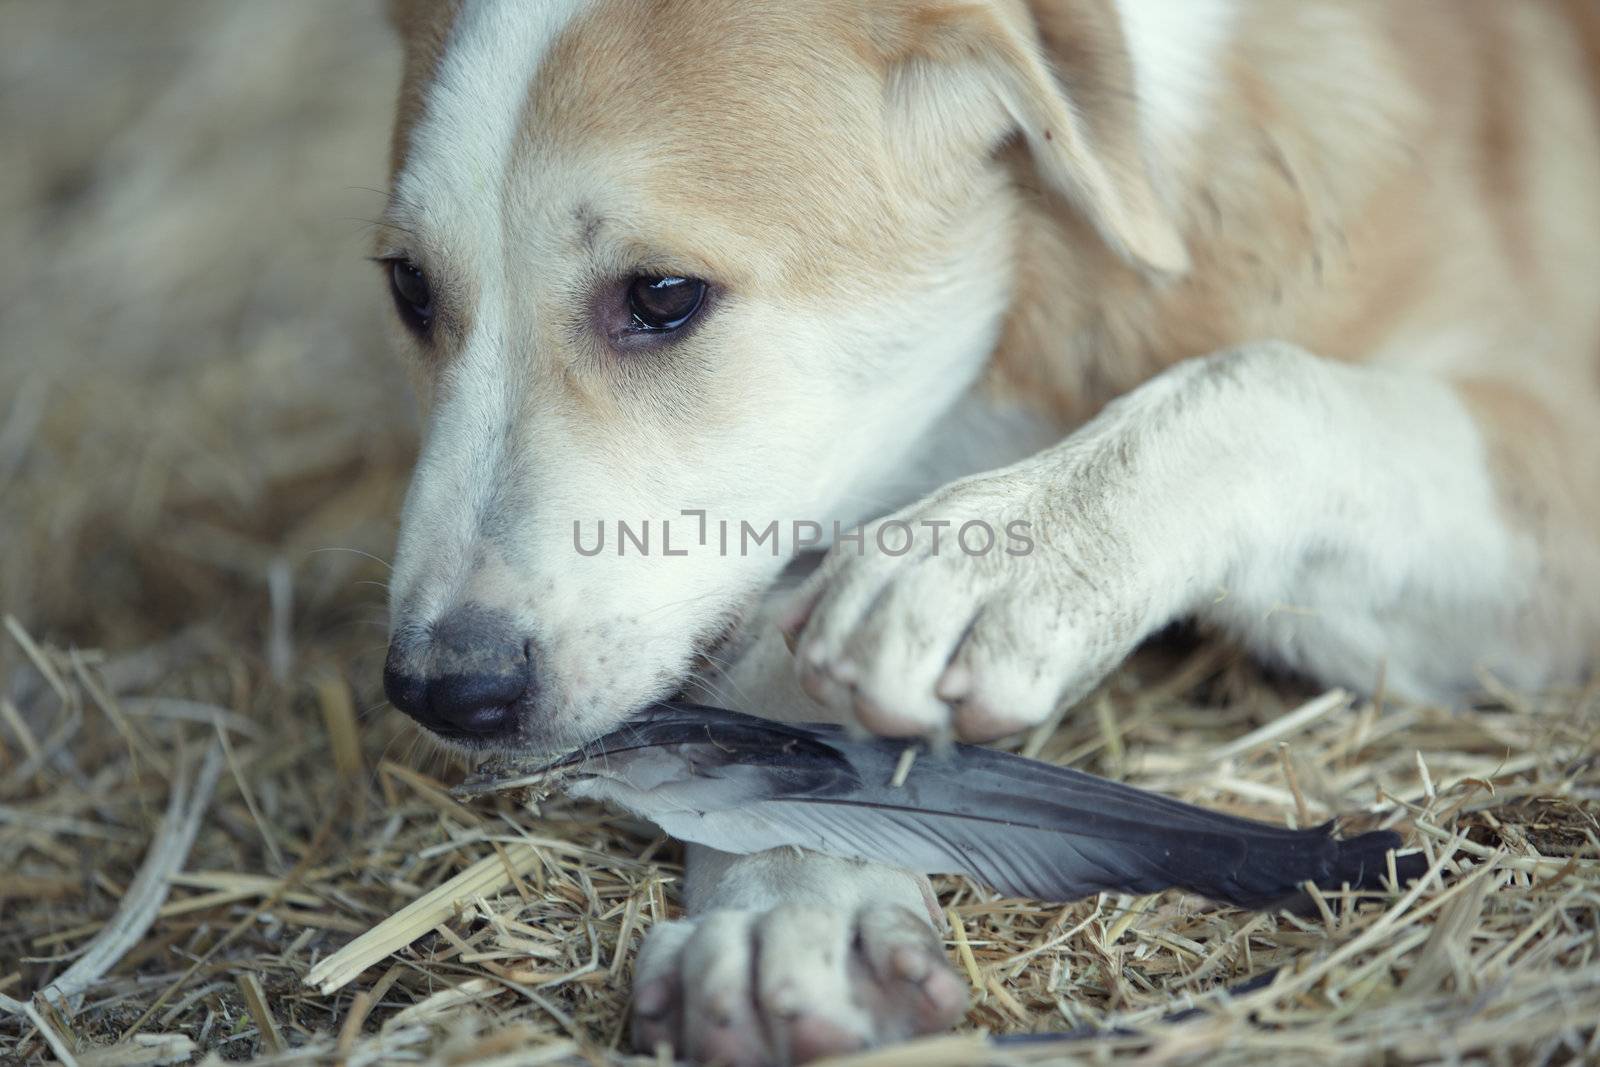 Young dog plays and eats feathers of bird